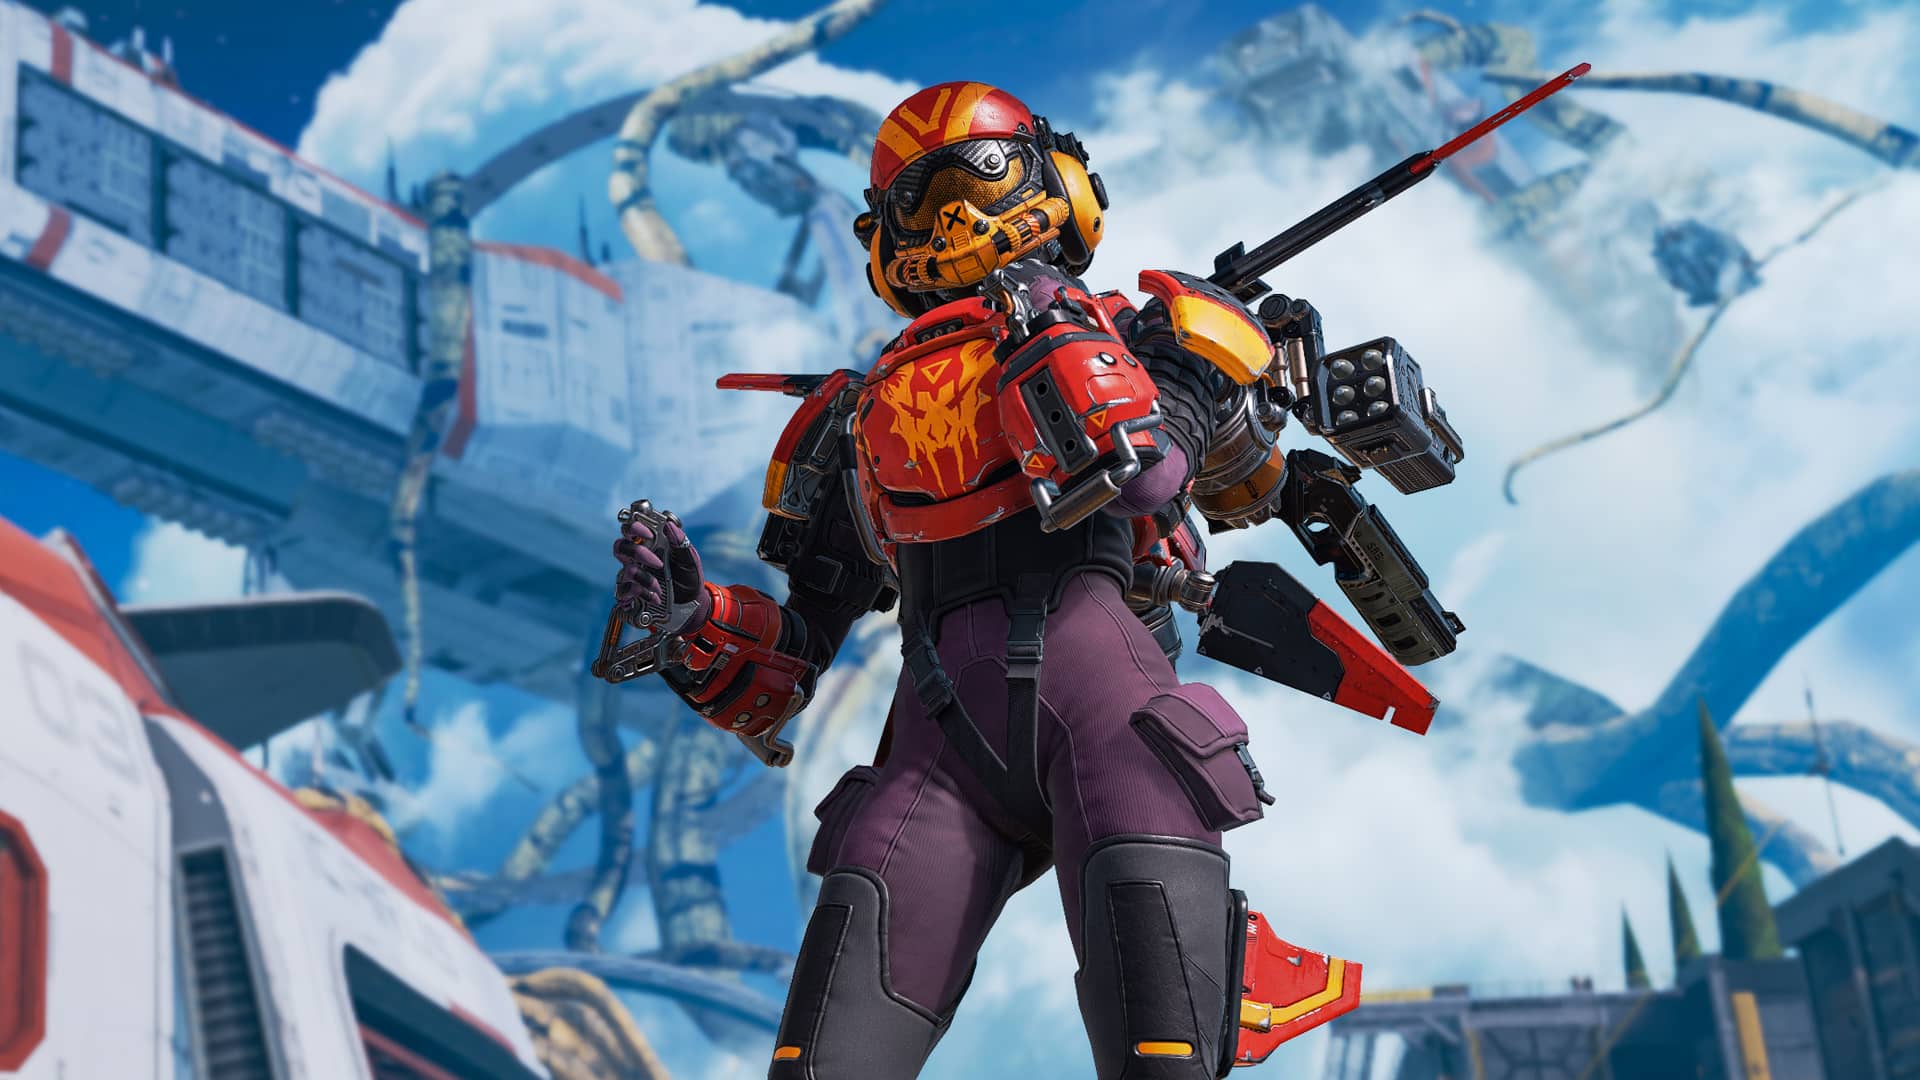 Major Apex Legends glitch gives Valkyrie's teammates permanent scans of enemies